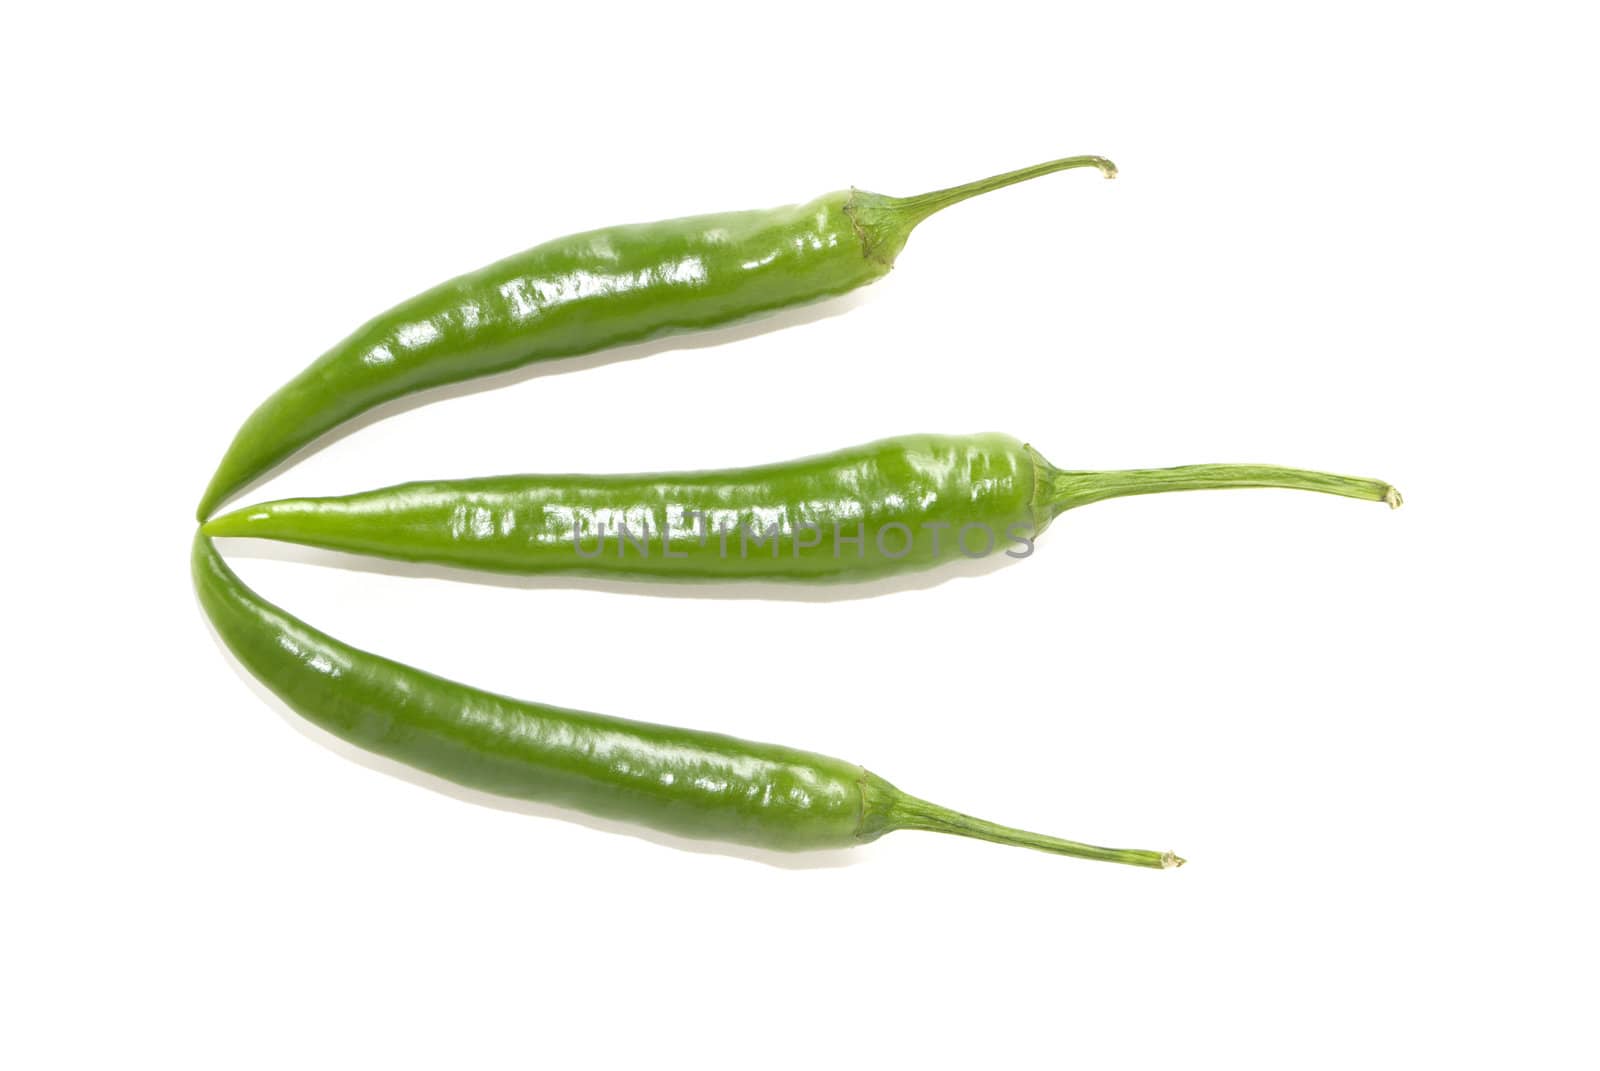 Green hot chili peppers by Olinkau